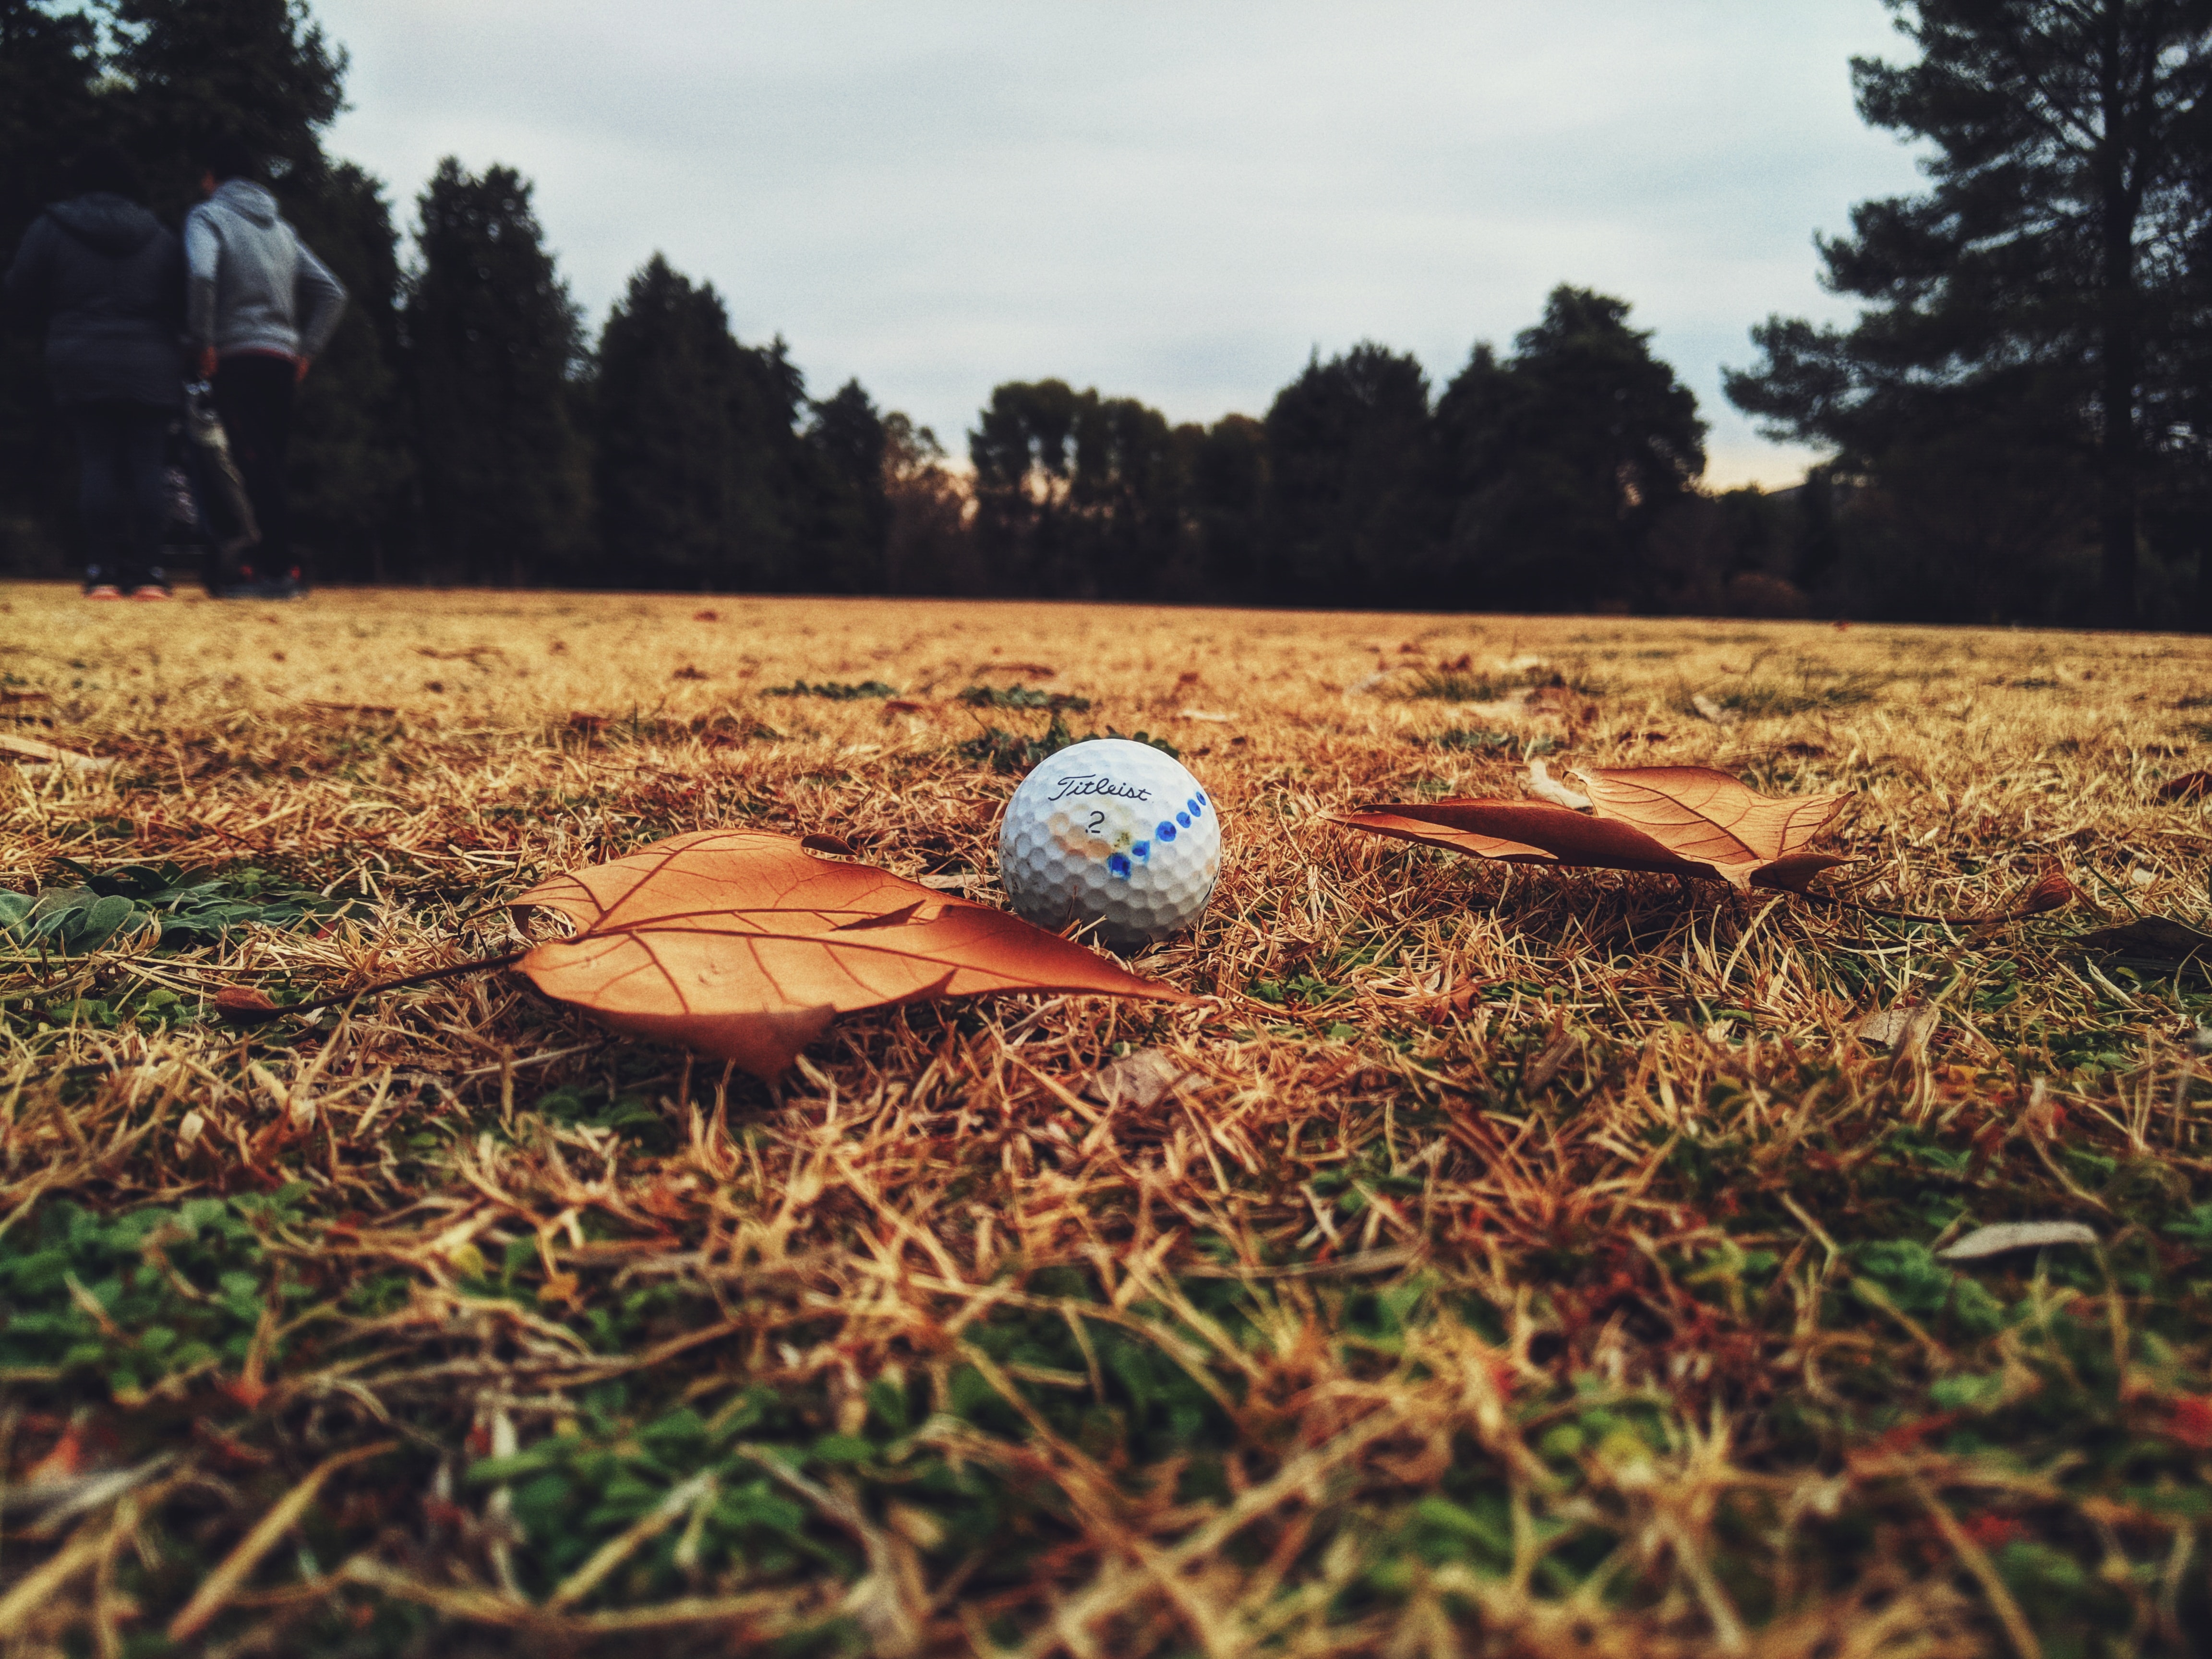 Spectator sues golfer and organisers after being hit on head with golf ball  | GolfMagic